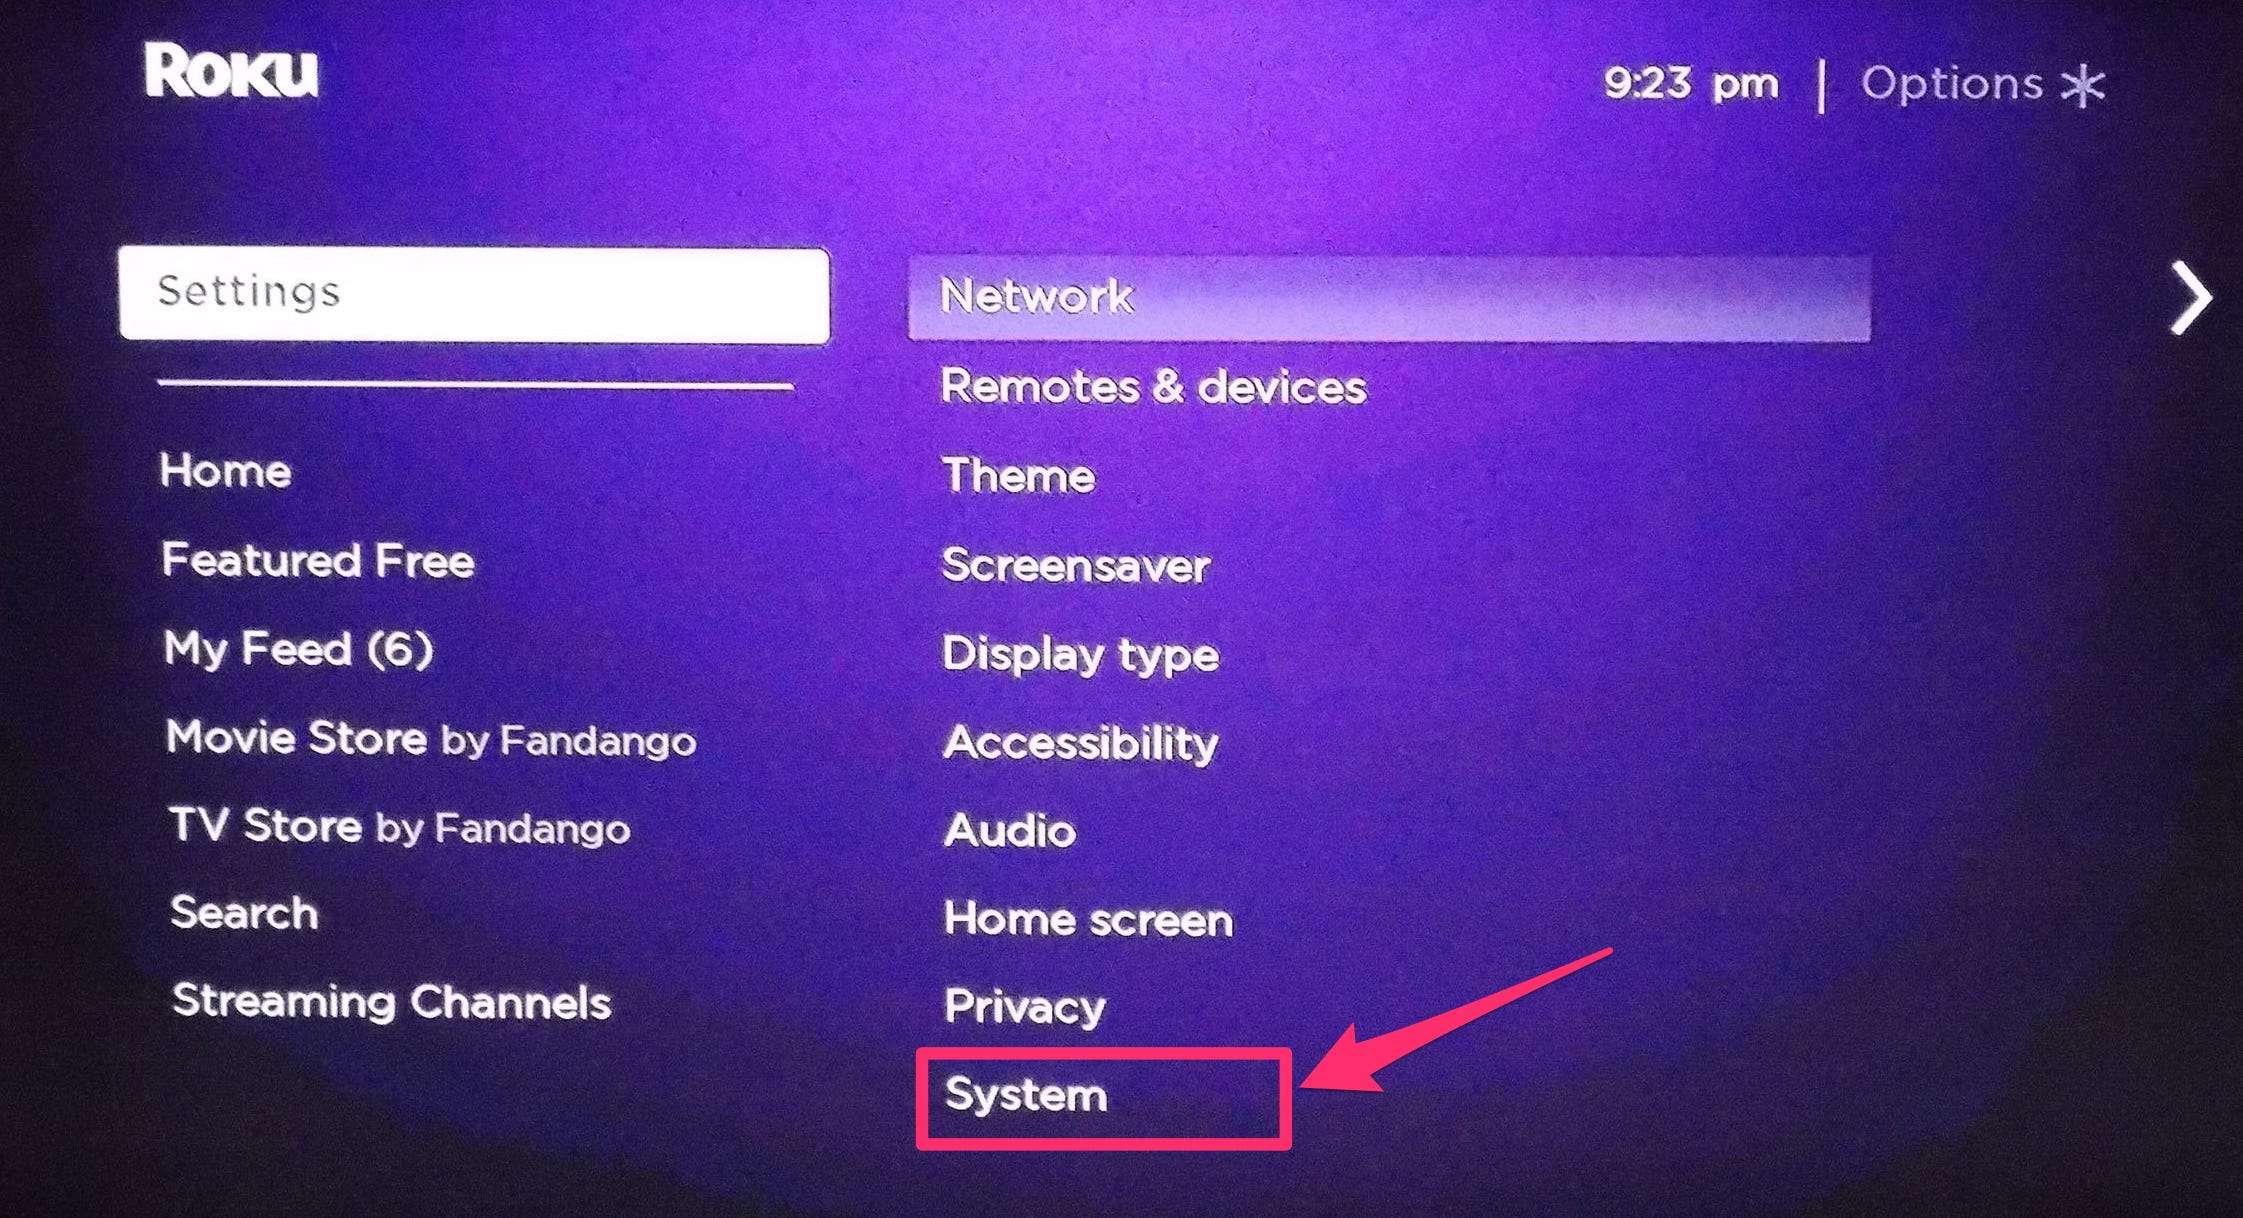 Go to the Roku home screen and navigate to the "Settings" menu.
Select "System" and then choose "System restart".